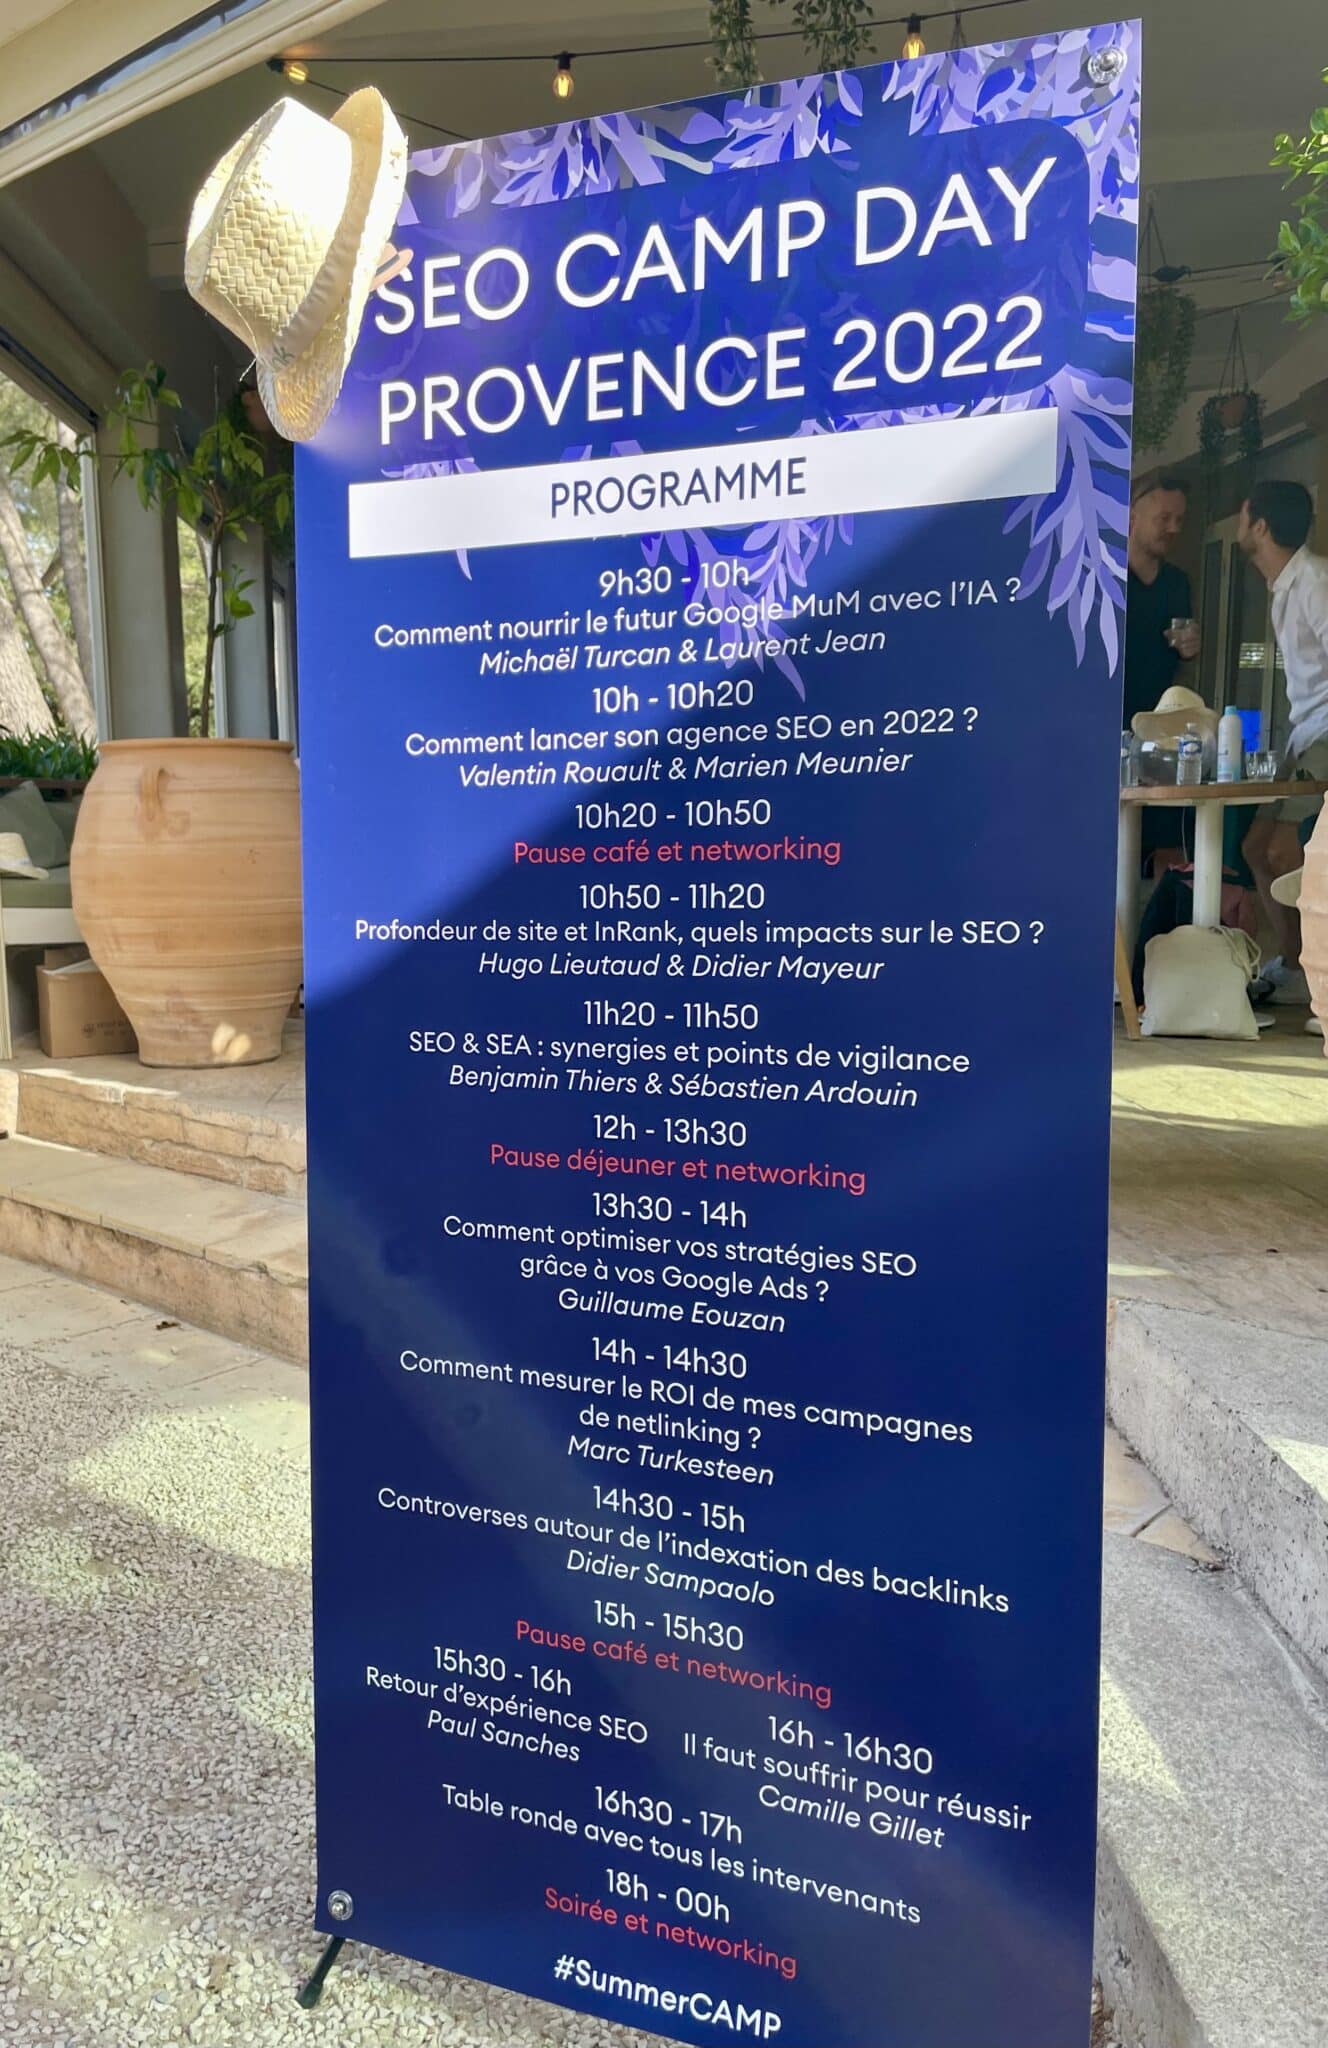 programme seo camp day provence